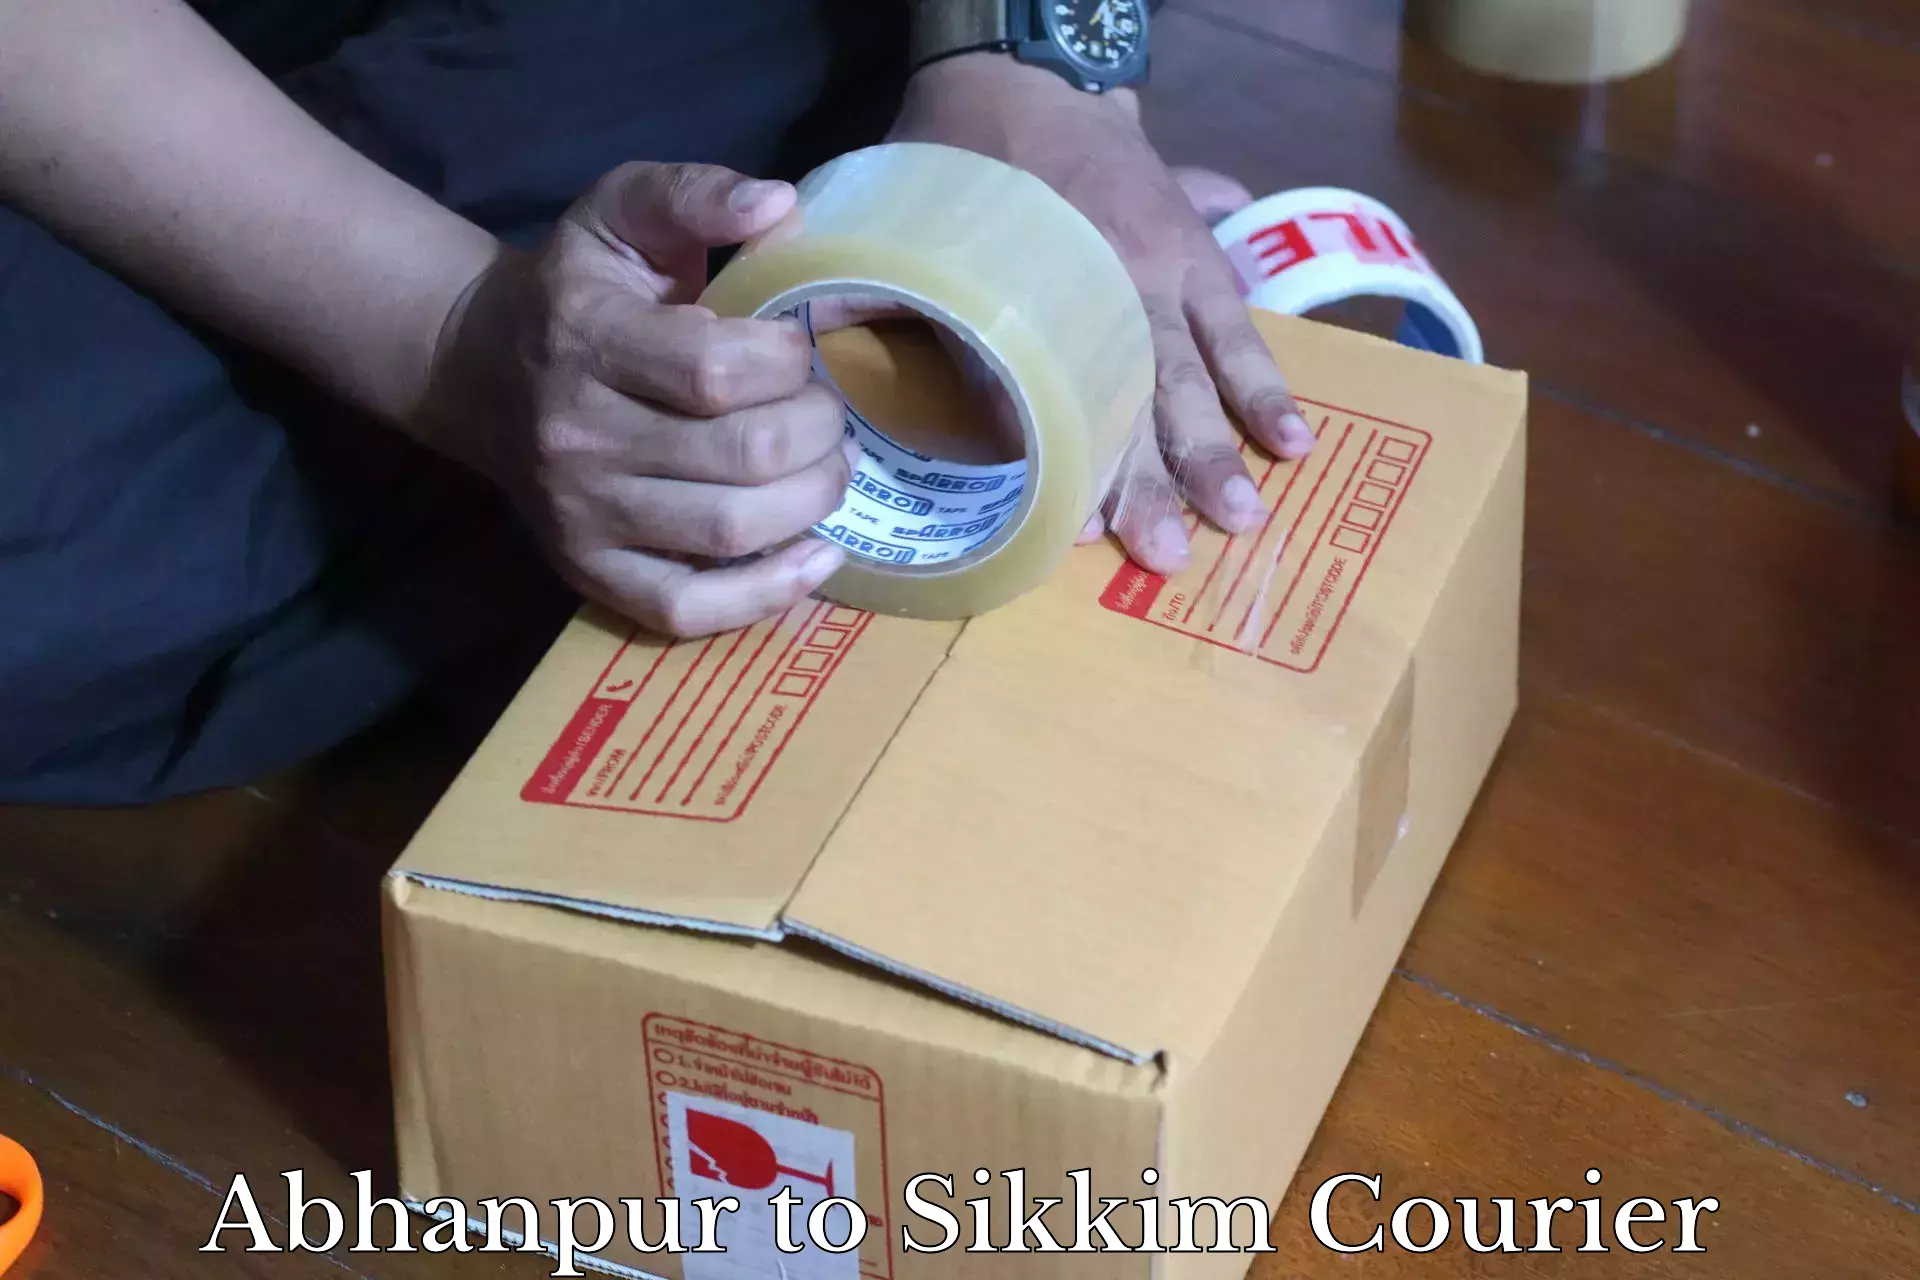 Smart shipping technology Abhanpur to Sikkim